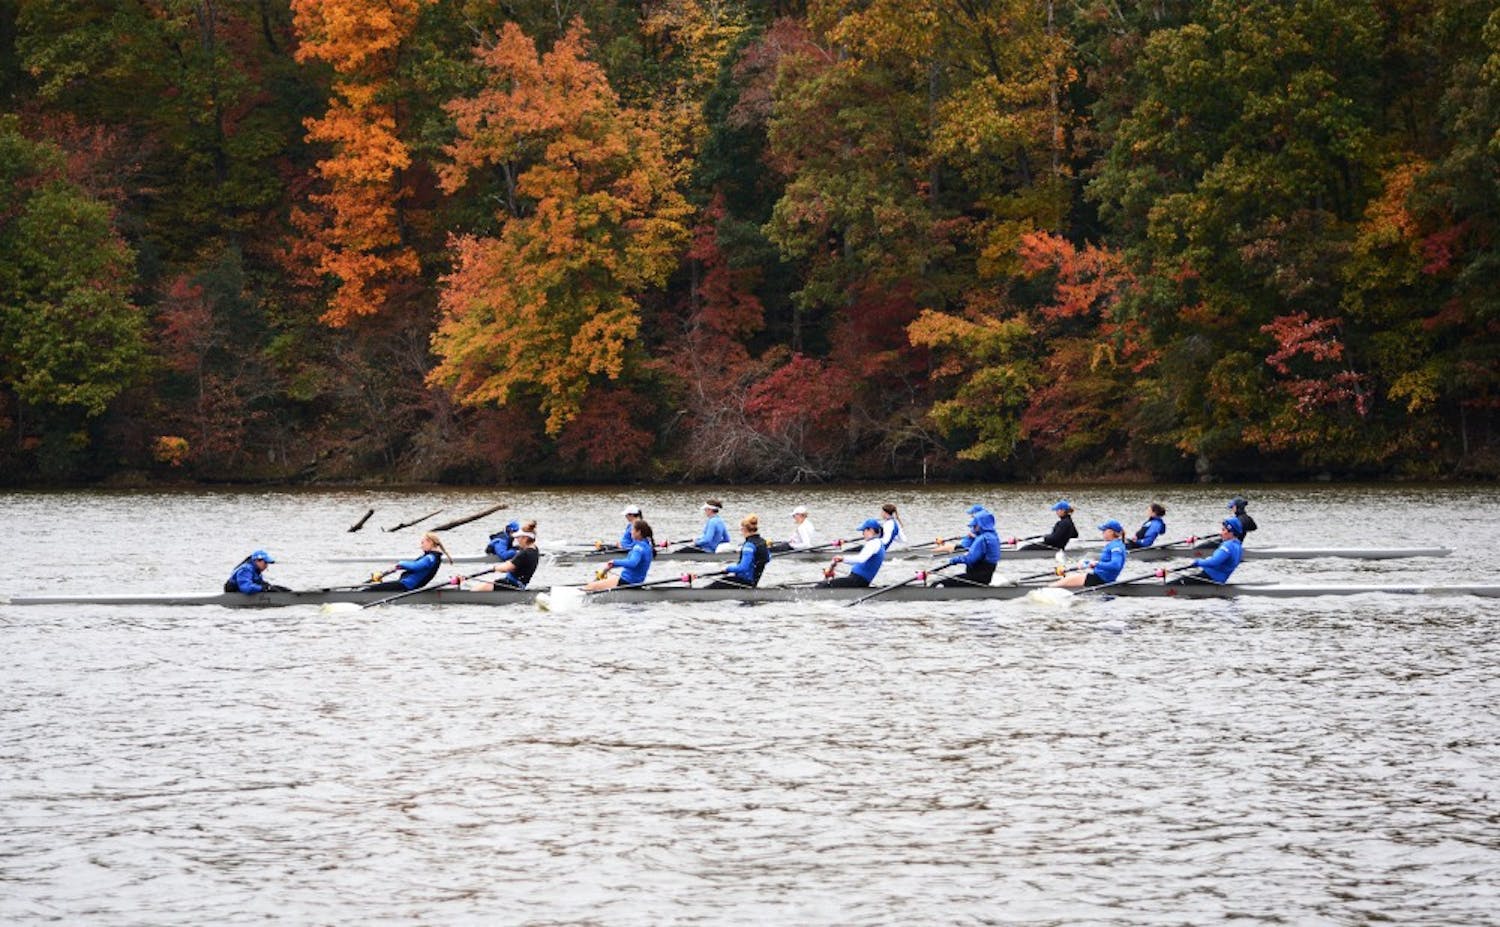 Duke's varsity eight boats will aim to bounce back from losses to Stanford and UCLA last month, but will have to do so against No. 3 Virginia Saturday.